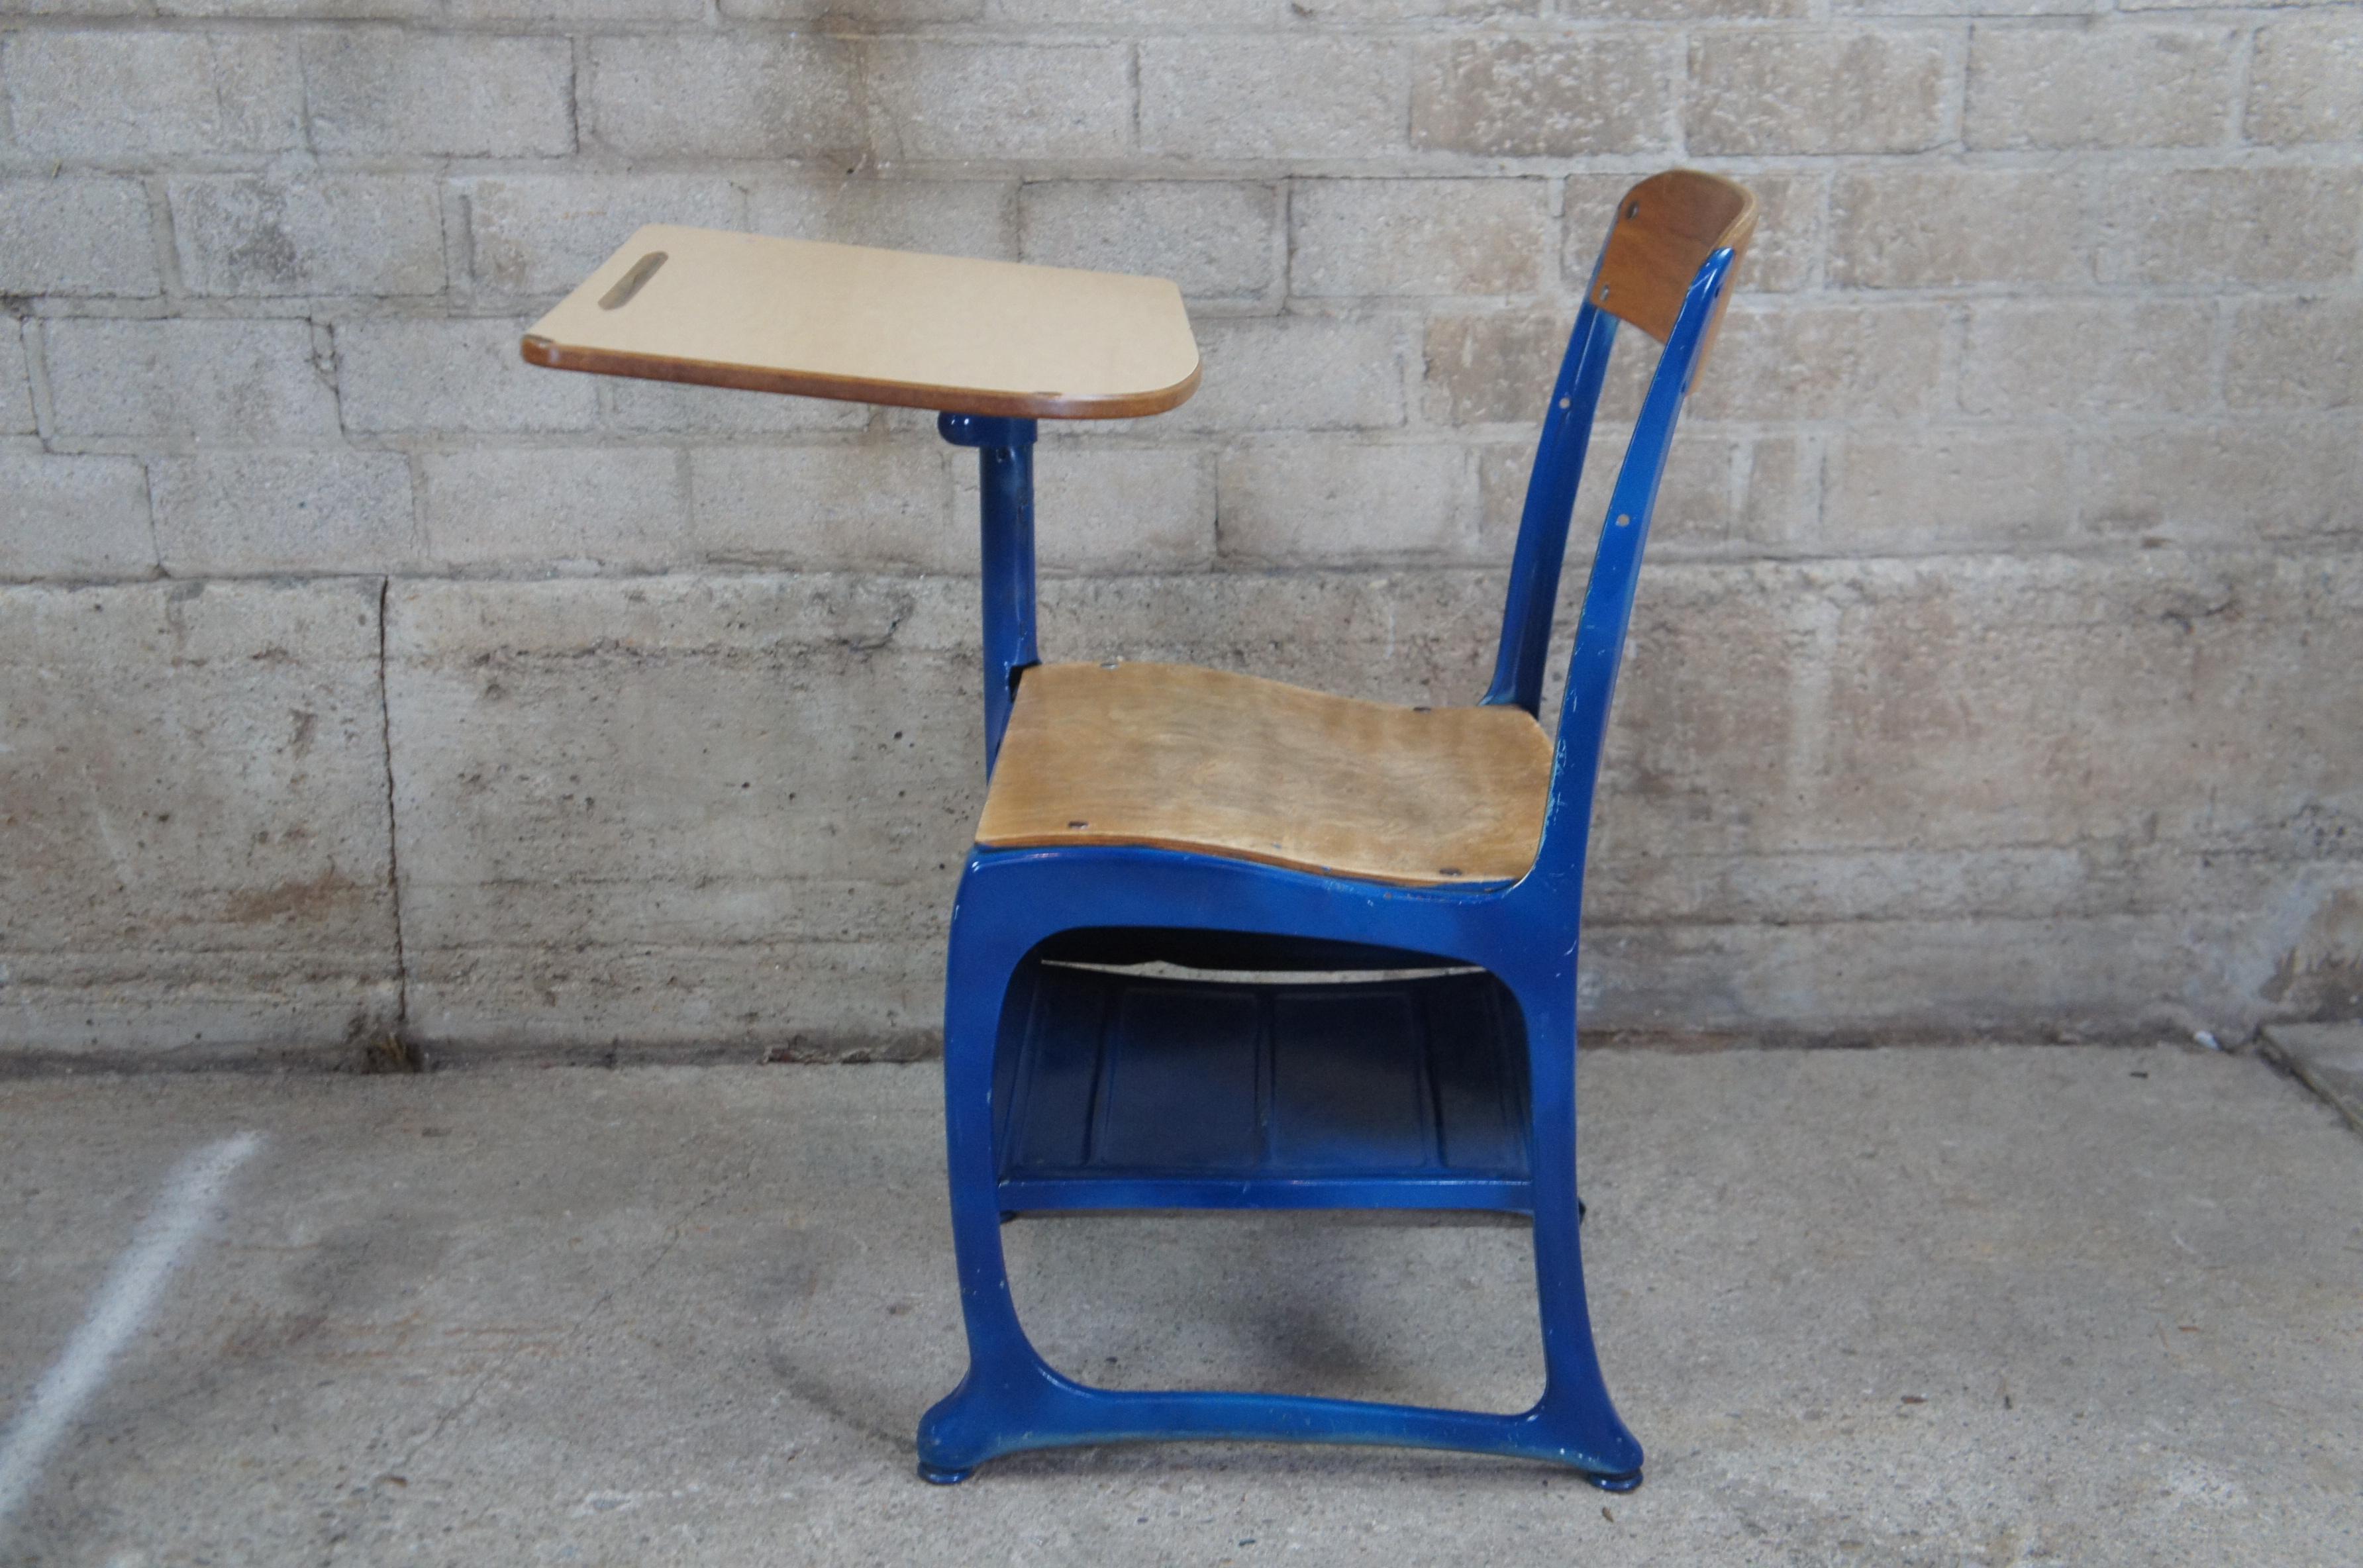 Mid-20th Century American Seating Envoy Students Childs School Desk Blue Mid Century Industrial